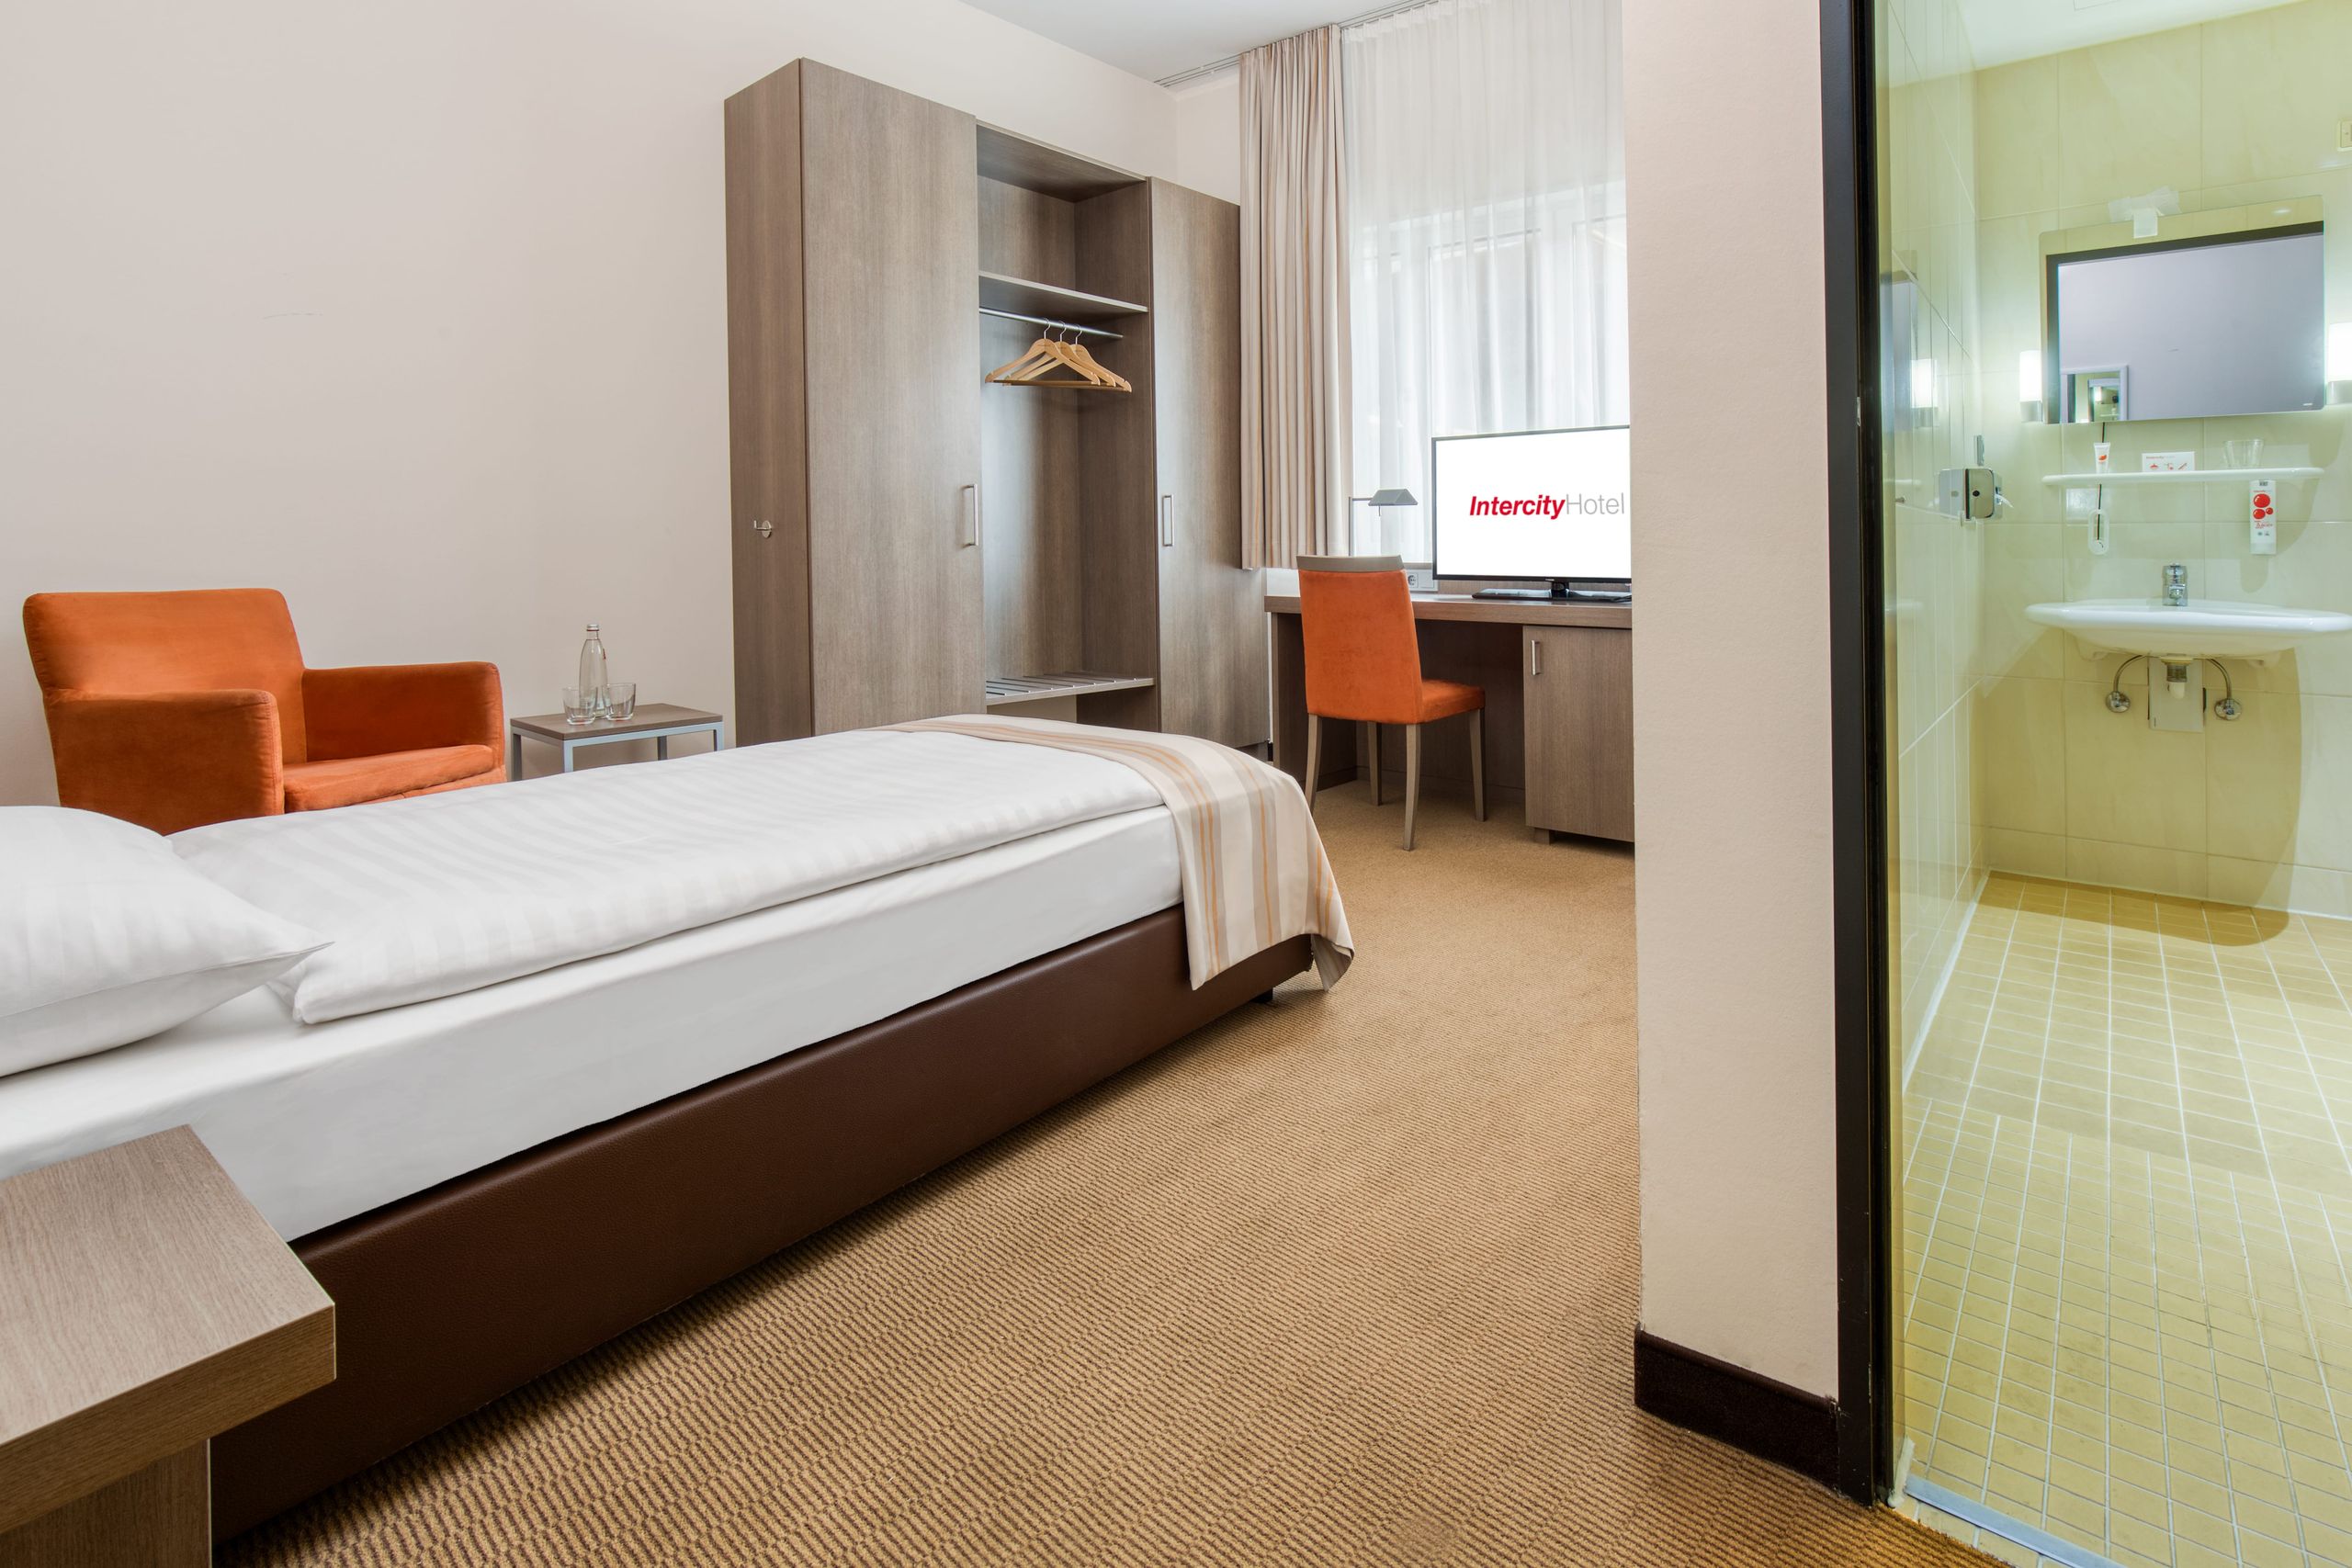 IntercityHotel Hannover - Handicapped Accessible room